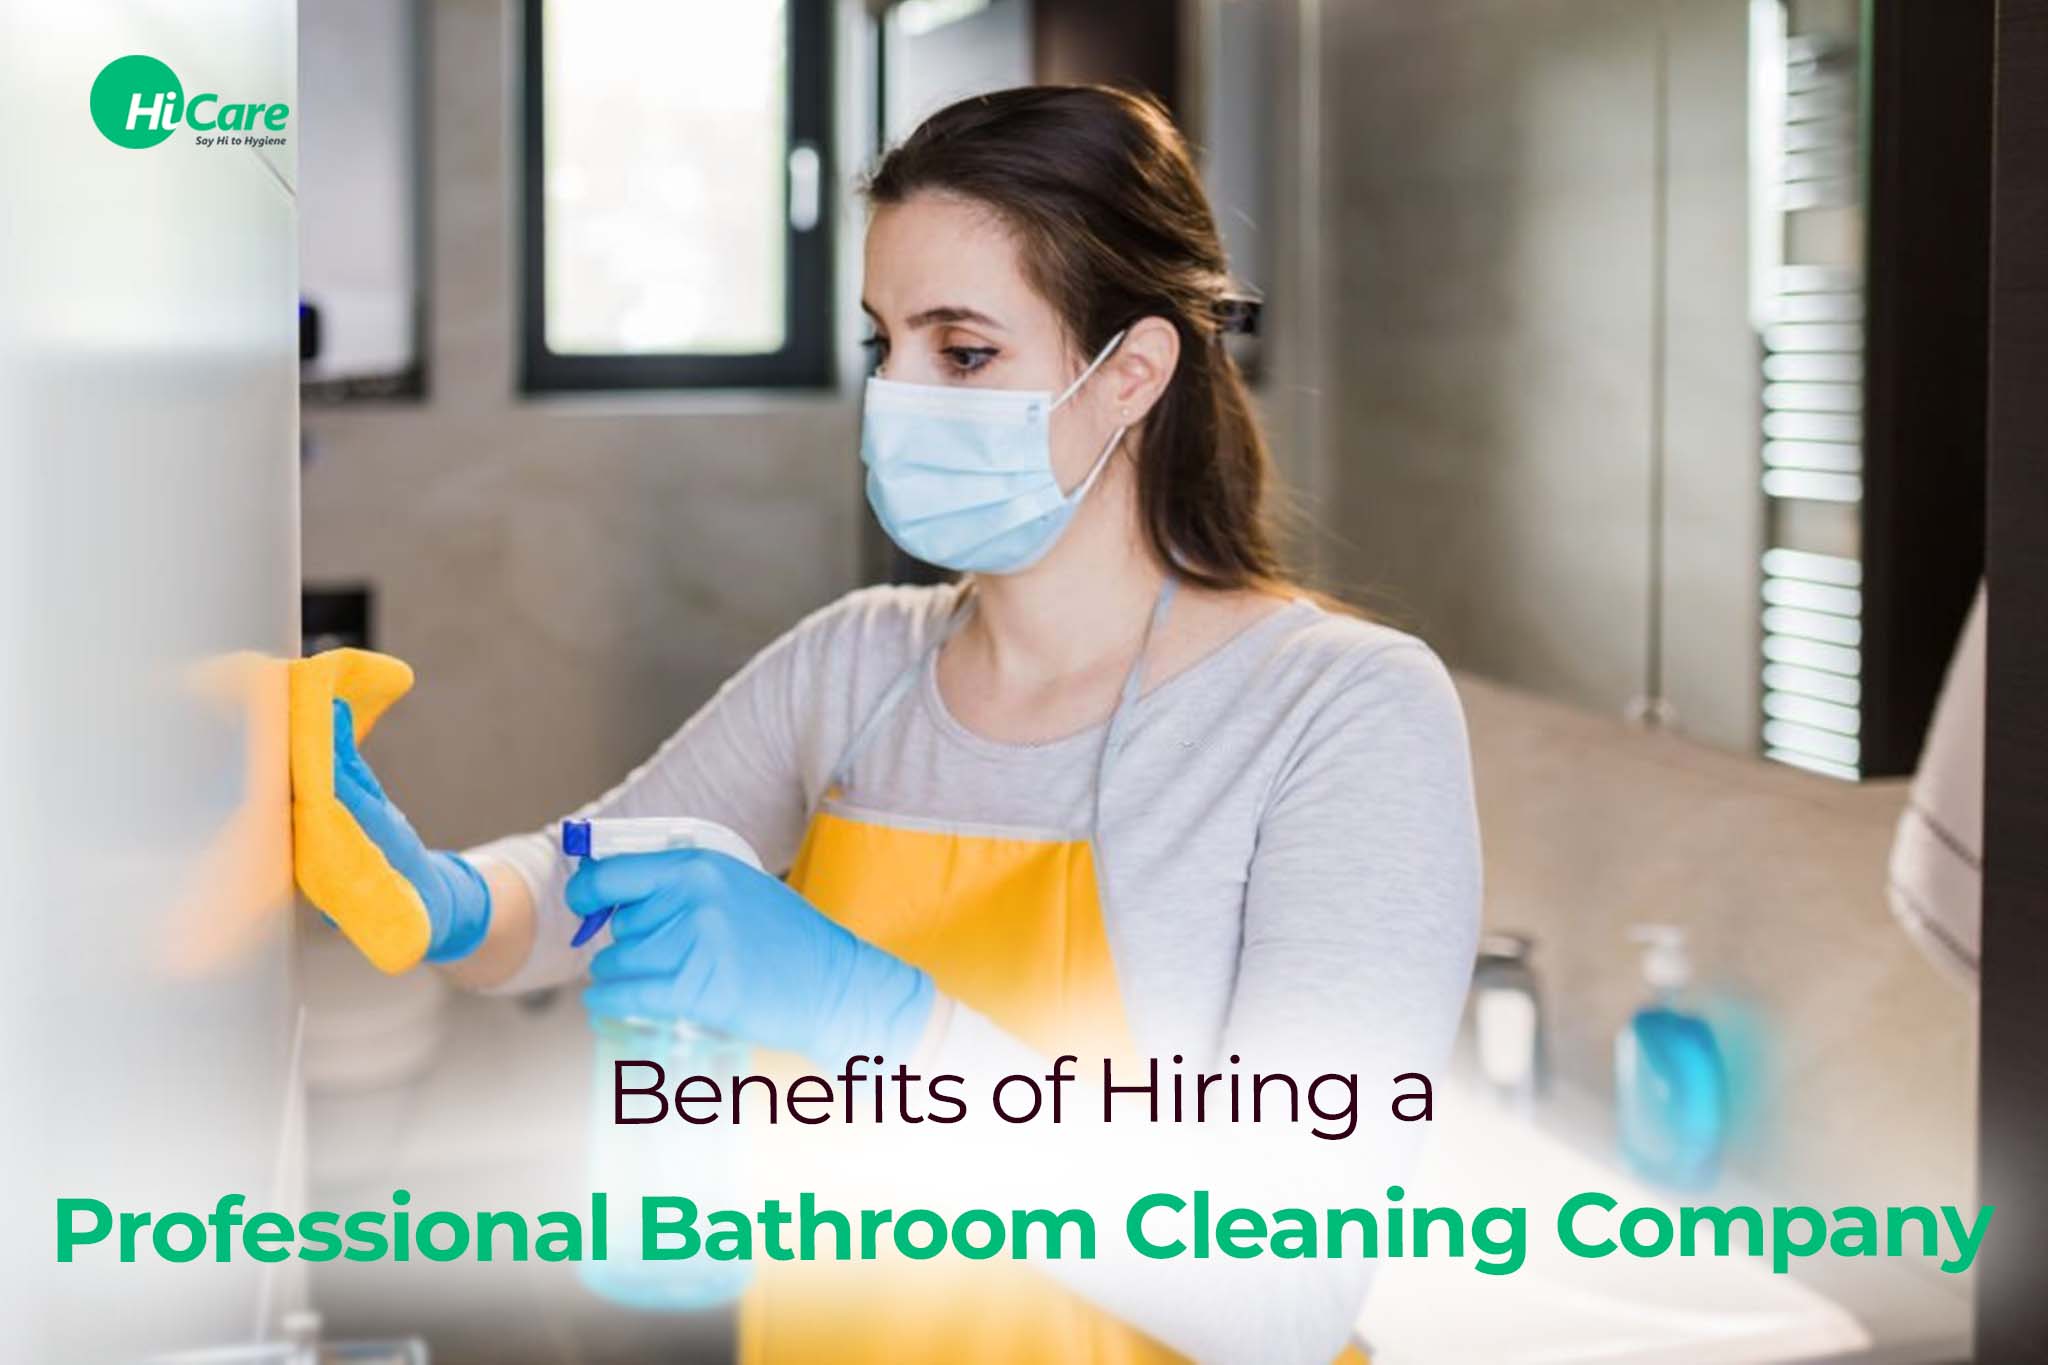 Bathroom Cleaning Service Features: What Comes with Bathroom Cleaning?